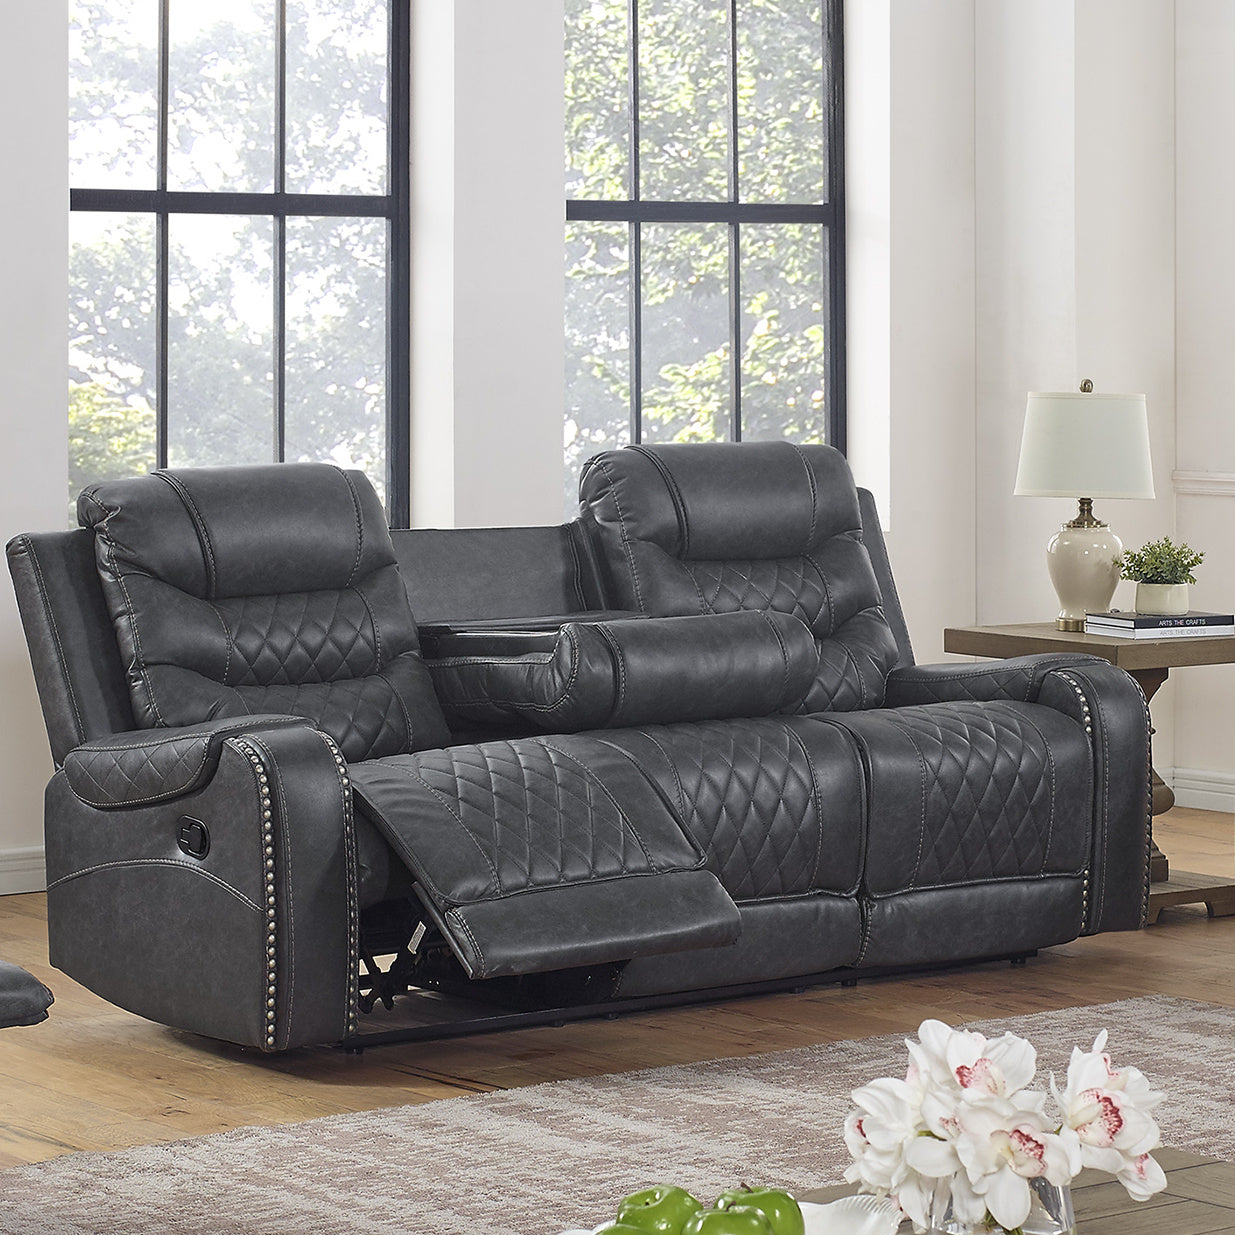 Klens Faux Leather Reclining Sofa with Nailhead Trim and USB Port, Gray